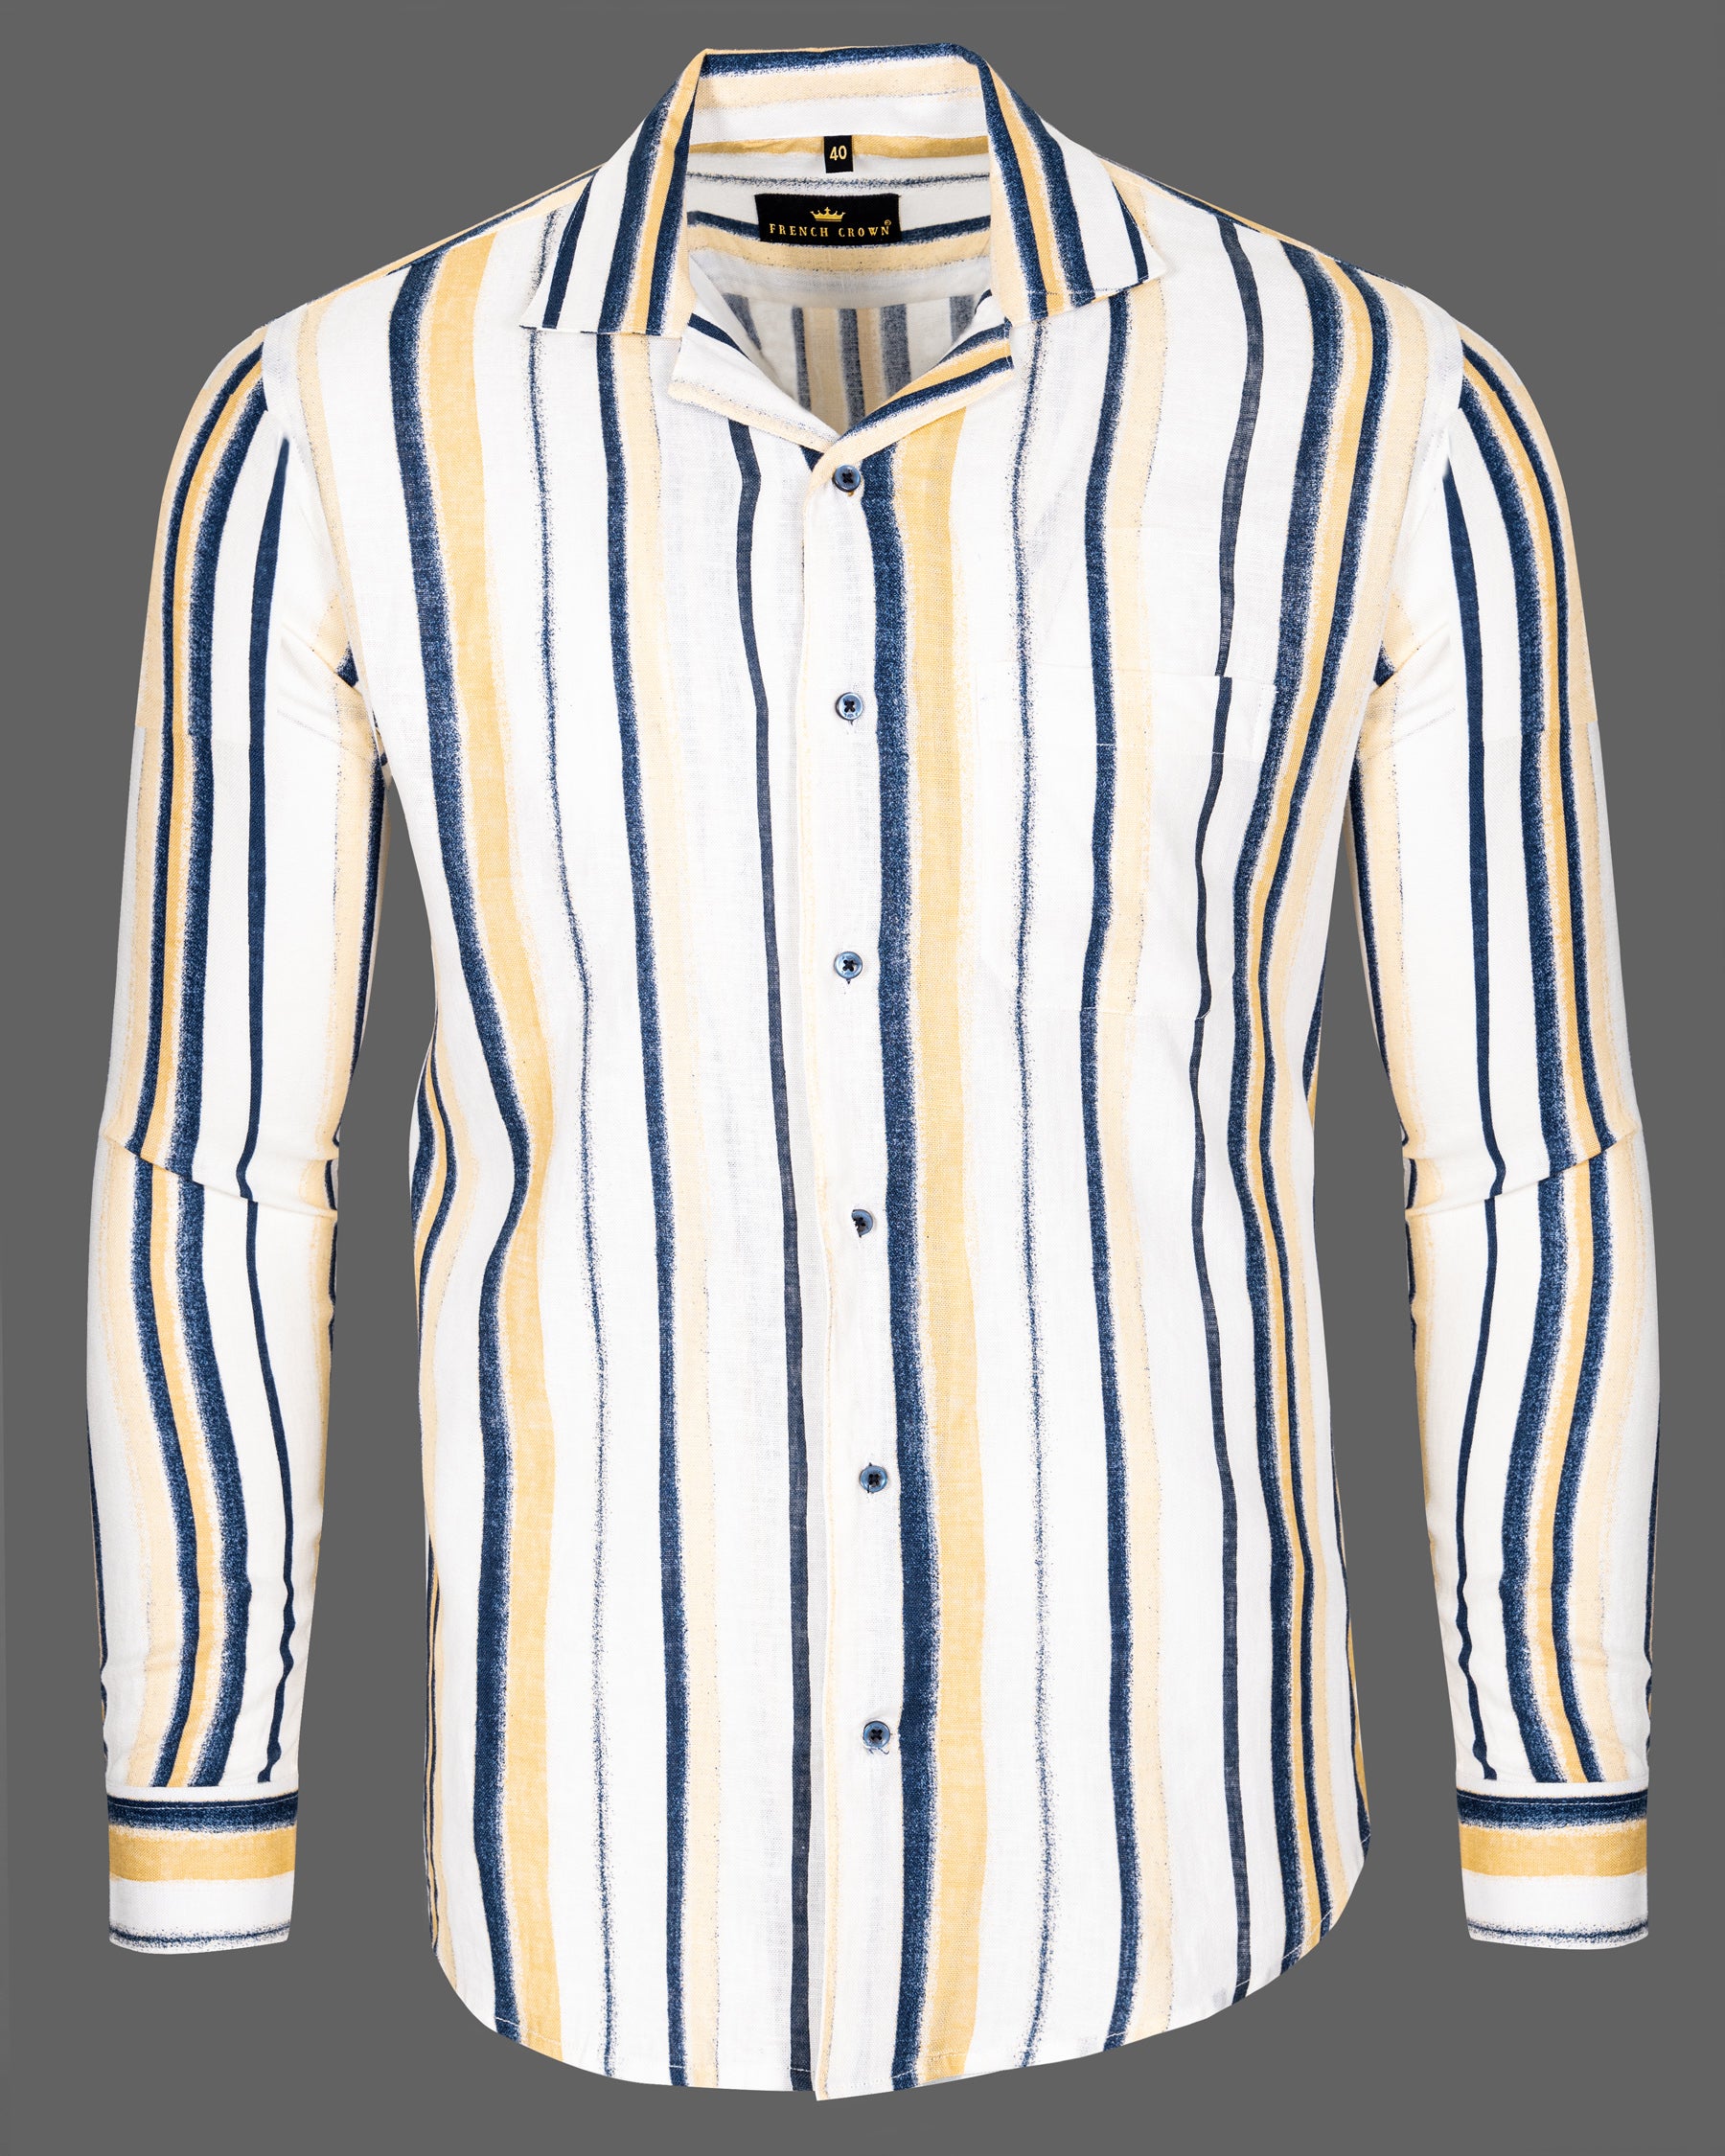 off white with blue faded striped printed Luxurious Linen Cuban collar Shirt 5186-CC-BLE-38, 5186-CC-BLE-H-38, 5186-CC-BLE-39, 5186-CC-BLE-H-39, 5186-CC-BLE-40, 5186-CC-BLE-H-40, 5186-CC-BLE-42, 5186-CC-BLE-H-42, 5186-CC-BLE-44, 5186-CC-BLE-H-44, 5186-CC-BLE-46, 5186-CC-BLE-H-46, 5186-CC-BLE-48, 5186-CC-BLE-H-48, 5186-CC-BLE-50, 5186-CC-BLE-H-50, 5186-CC-BLE-52, 5186-CC-BLE-H-52